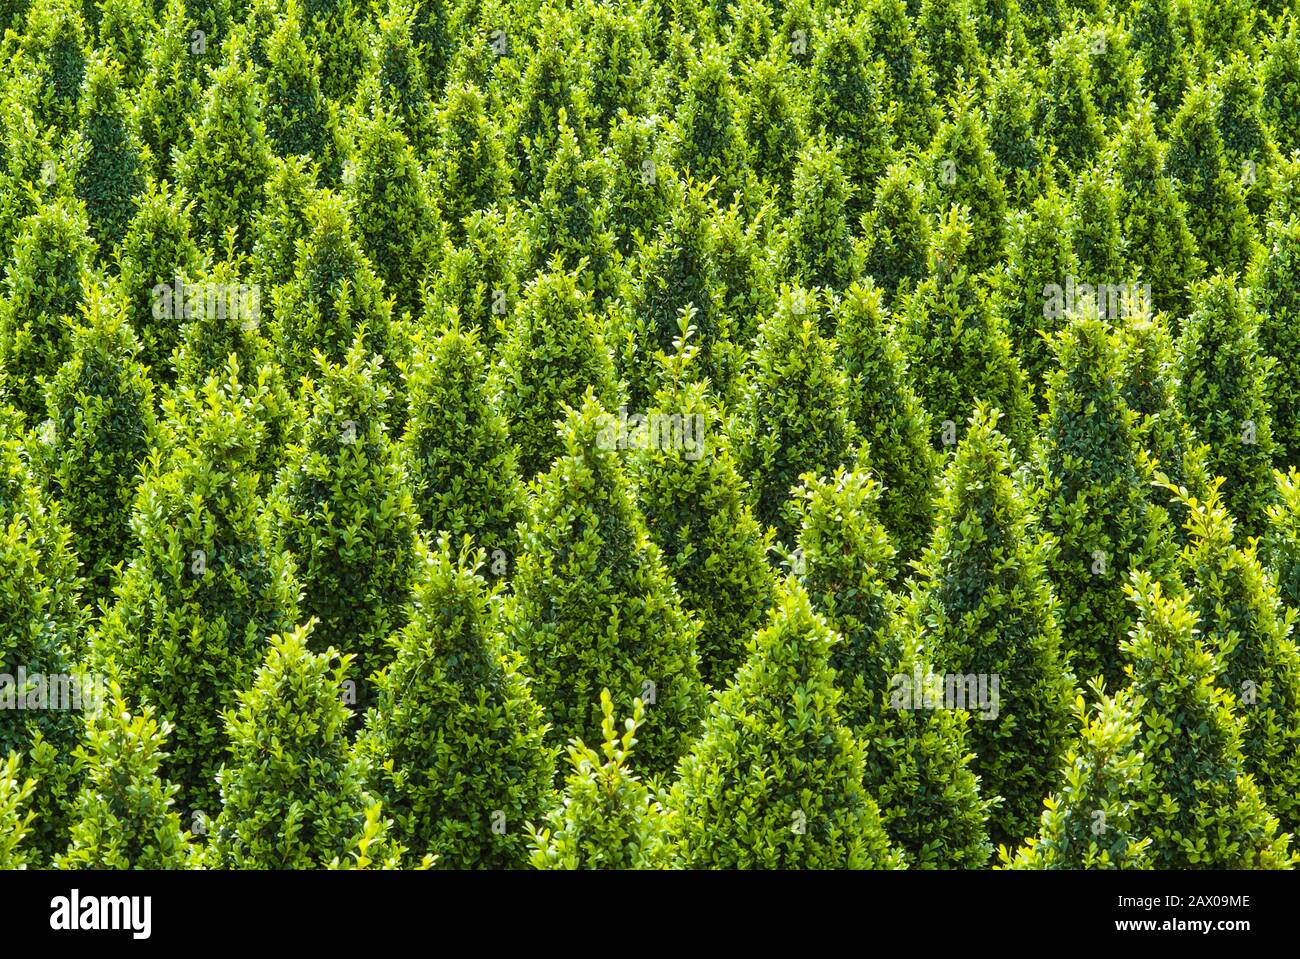 Industrial growth of sculpted green buxus trees Stock Photo